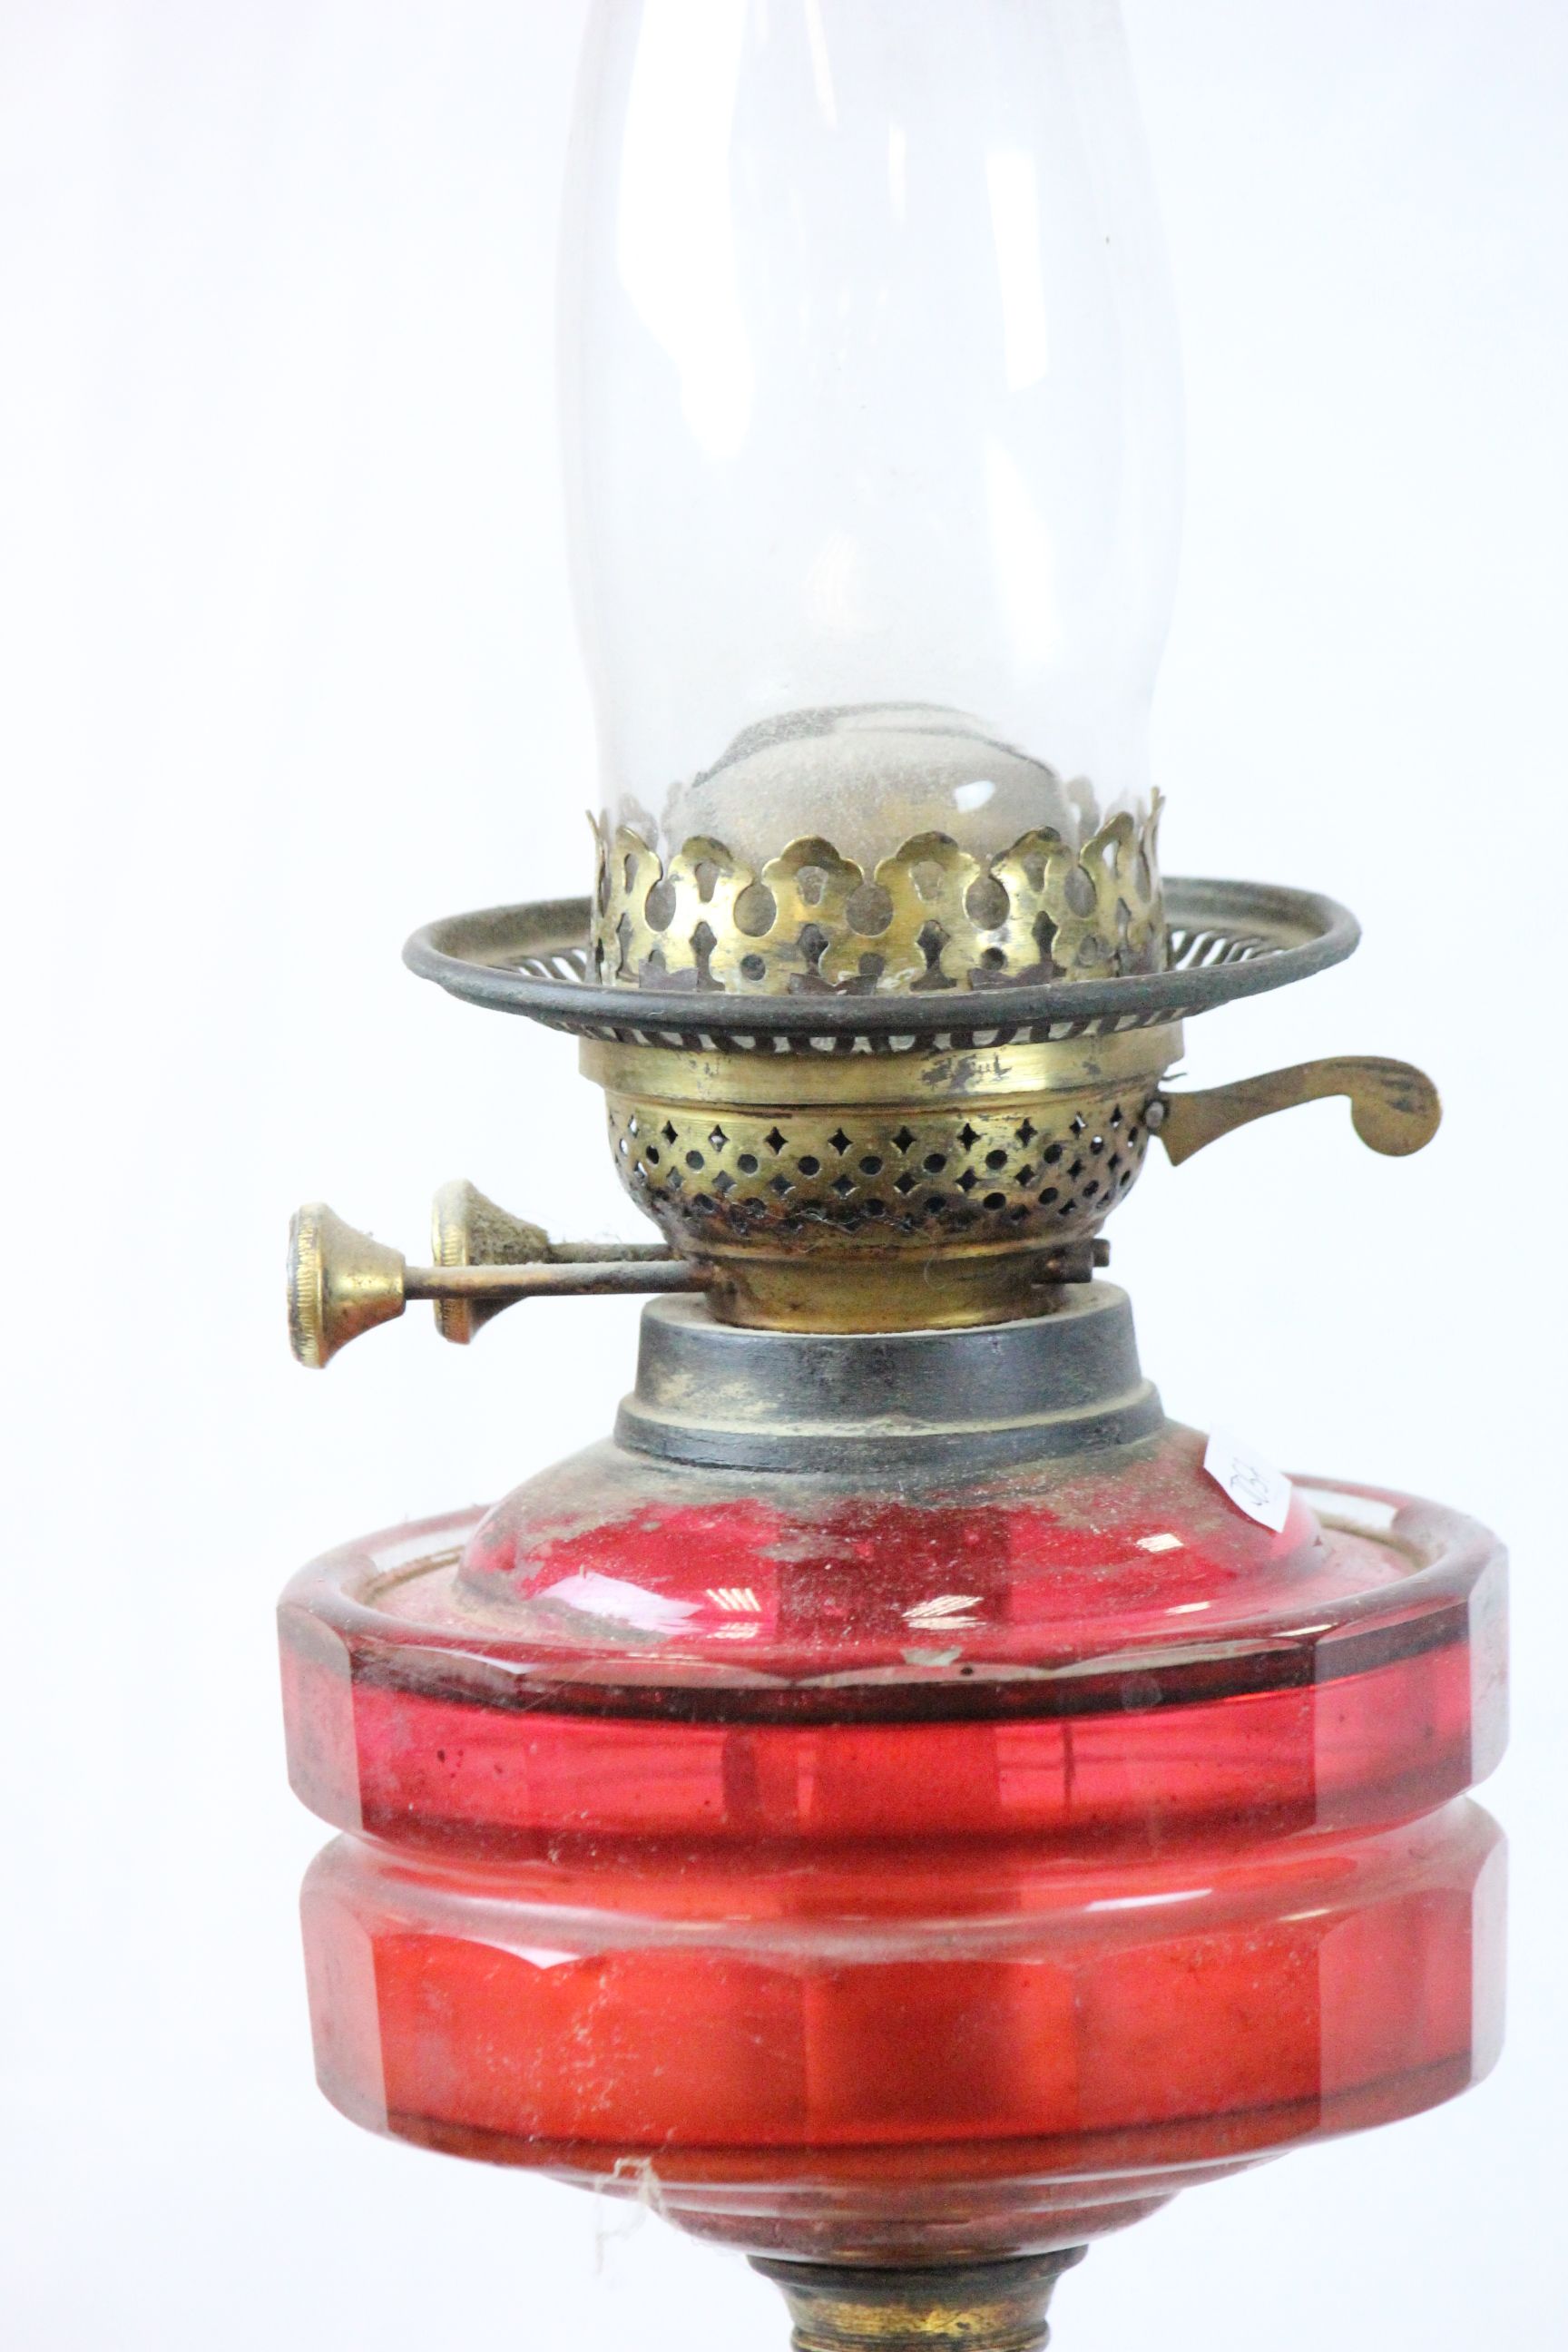 Victorian Brass Oil lamp with red glass reservoir - Image 2 of 2